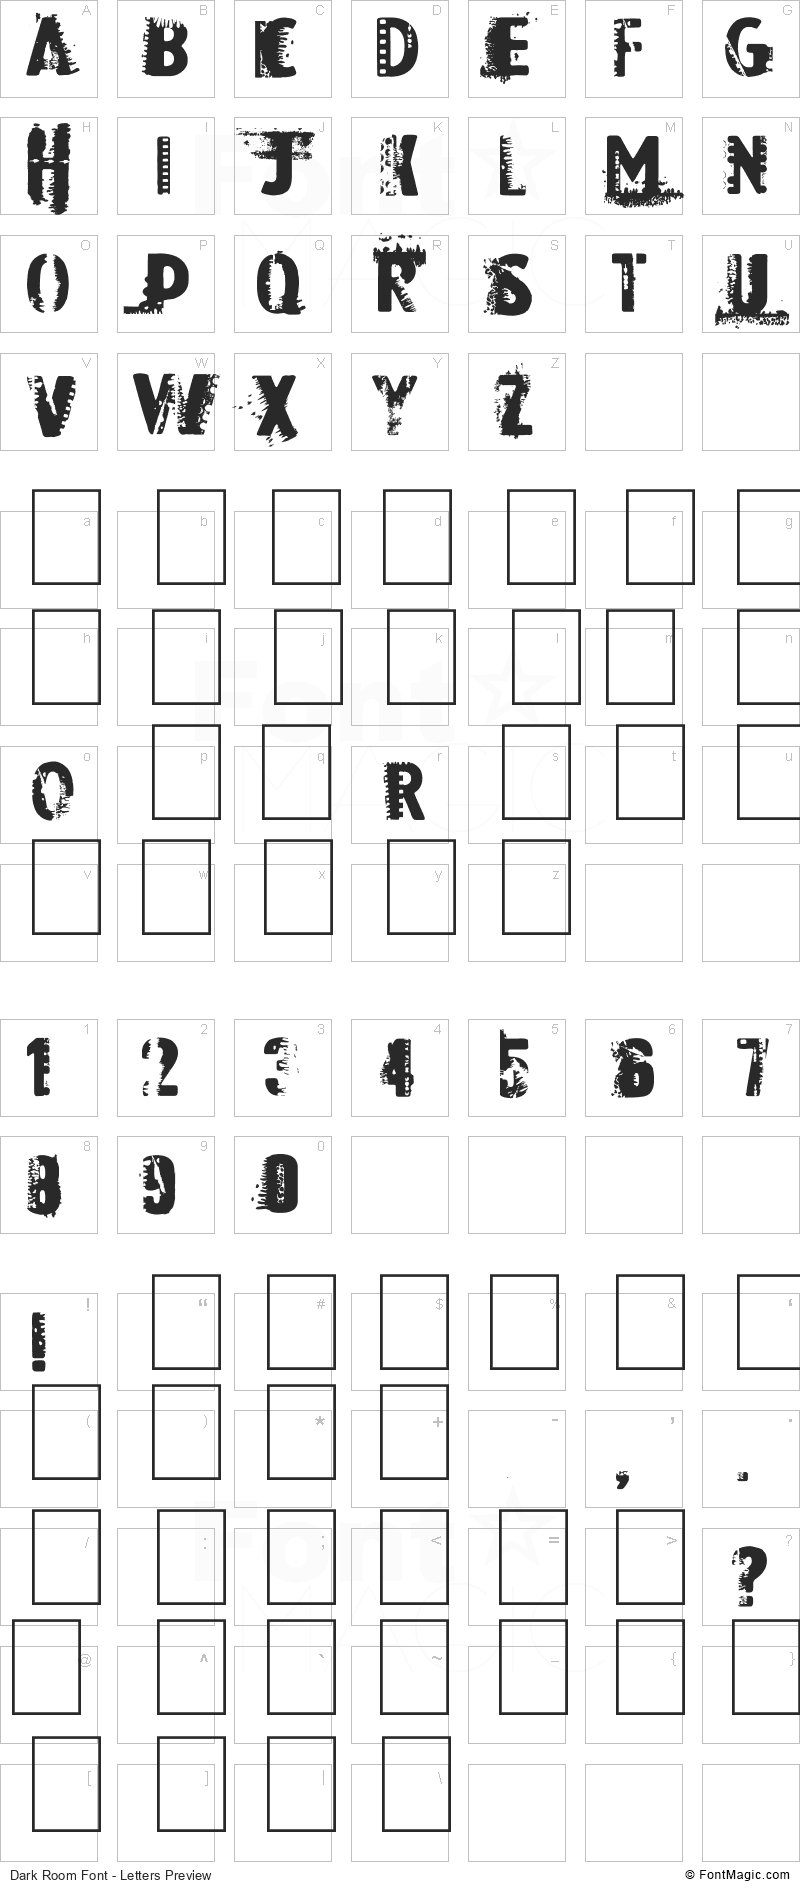 Dark Room Font - All Latters Preview Chart